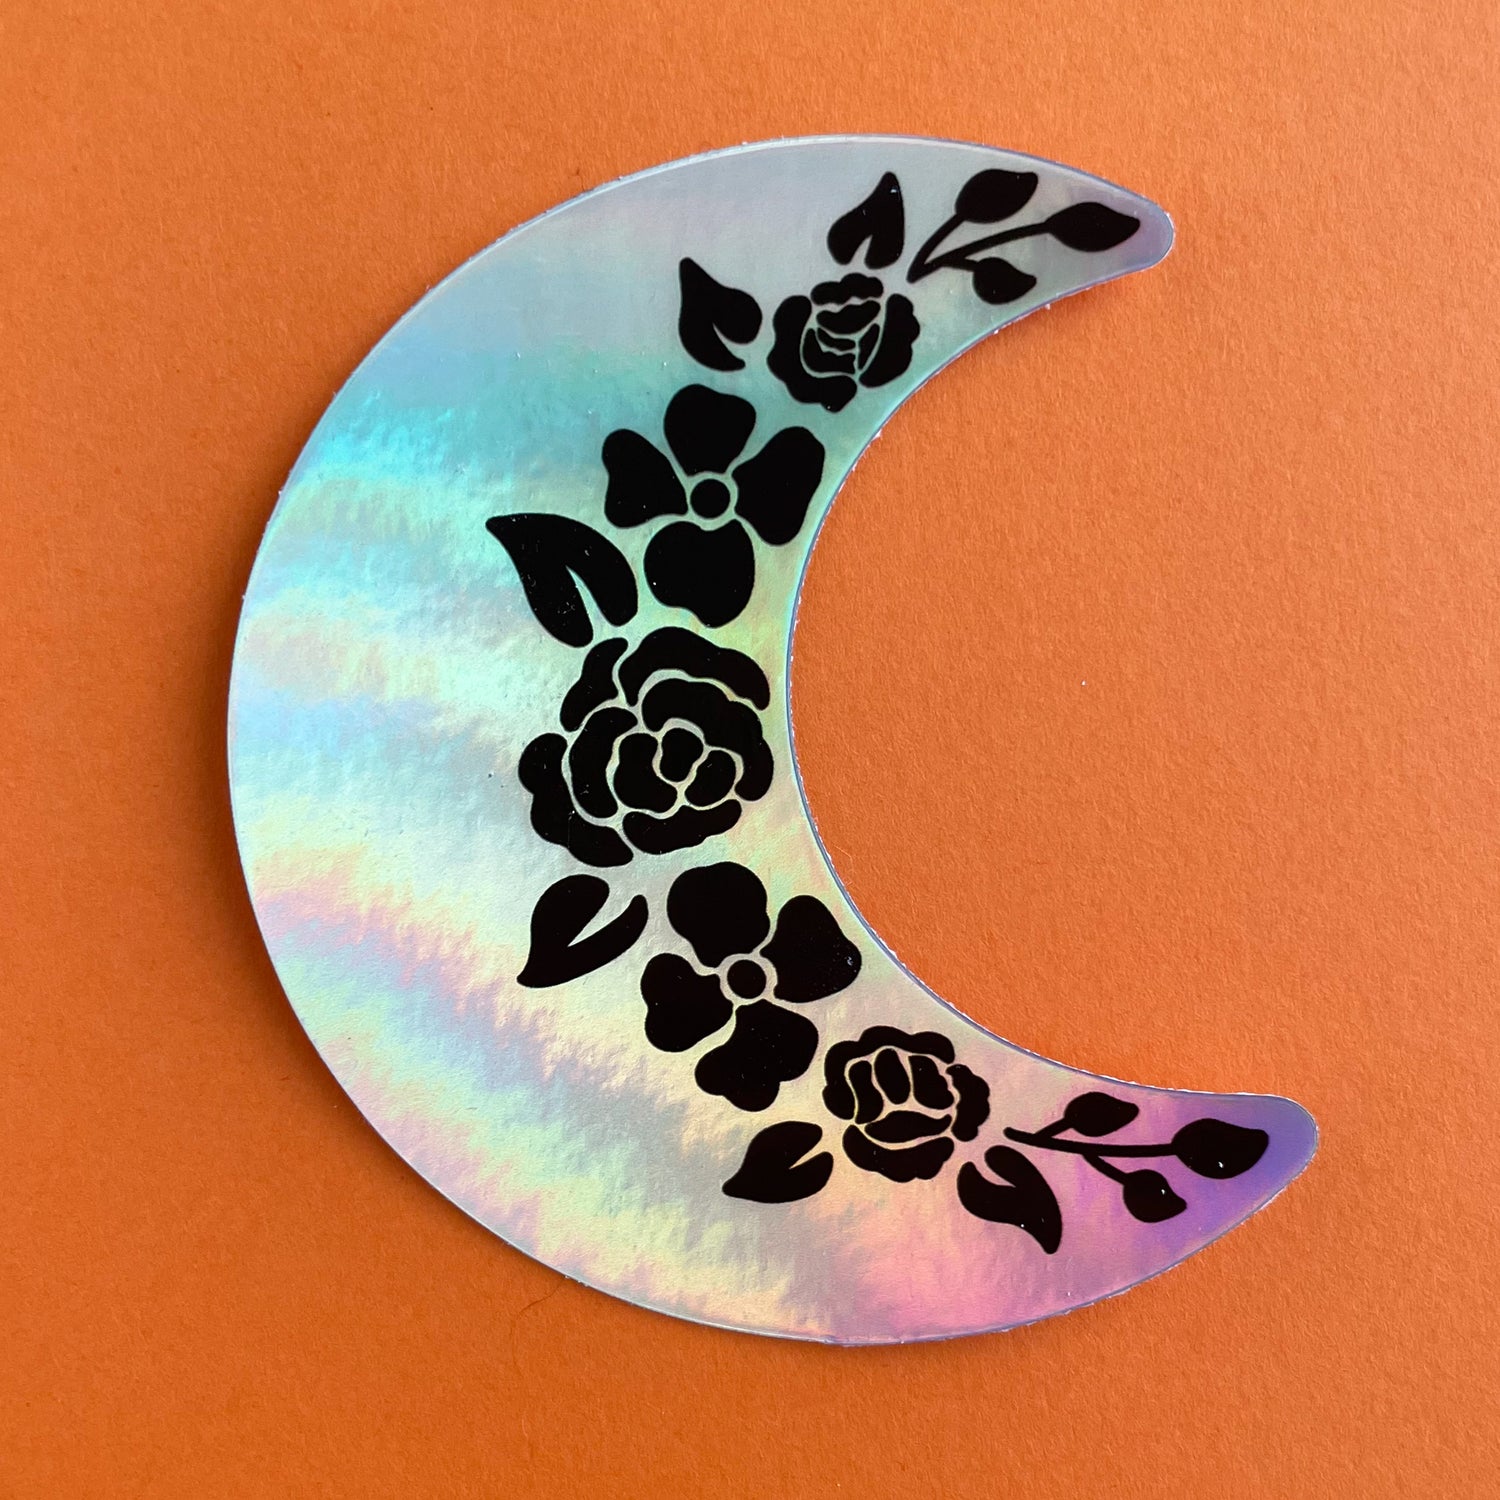 A crescent moon shaped holographic sticker. It has black floral outlines along the inside edge. The sticker is on an orange background.